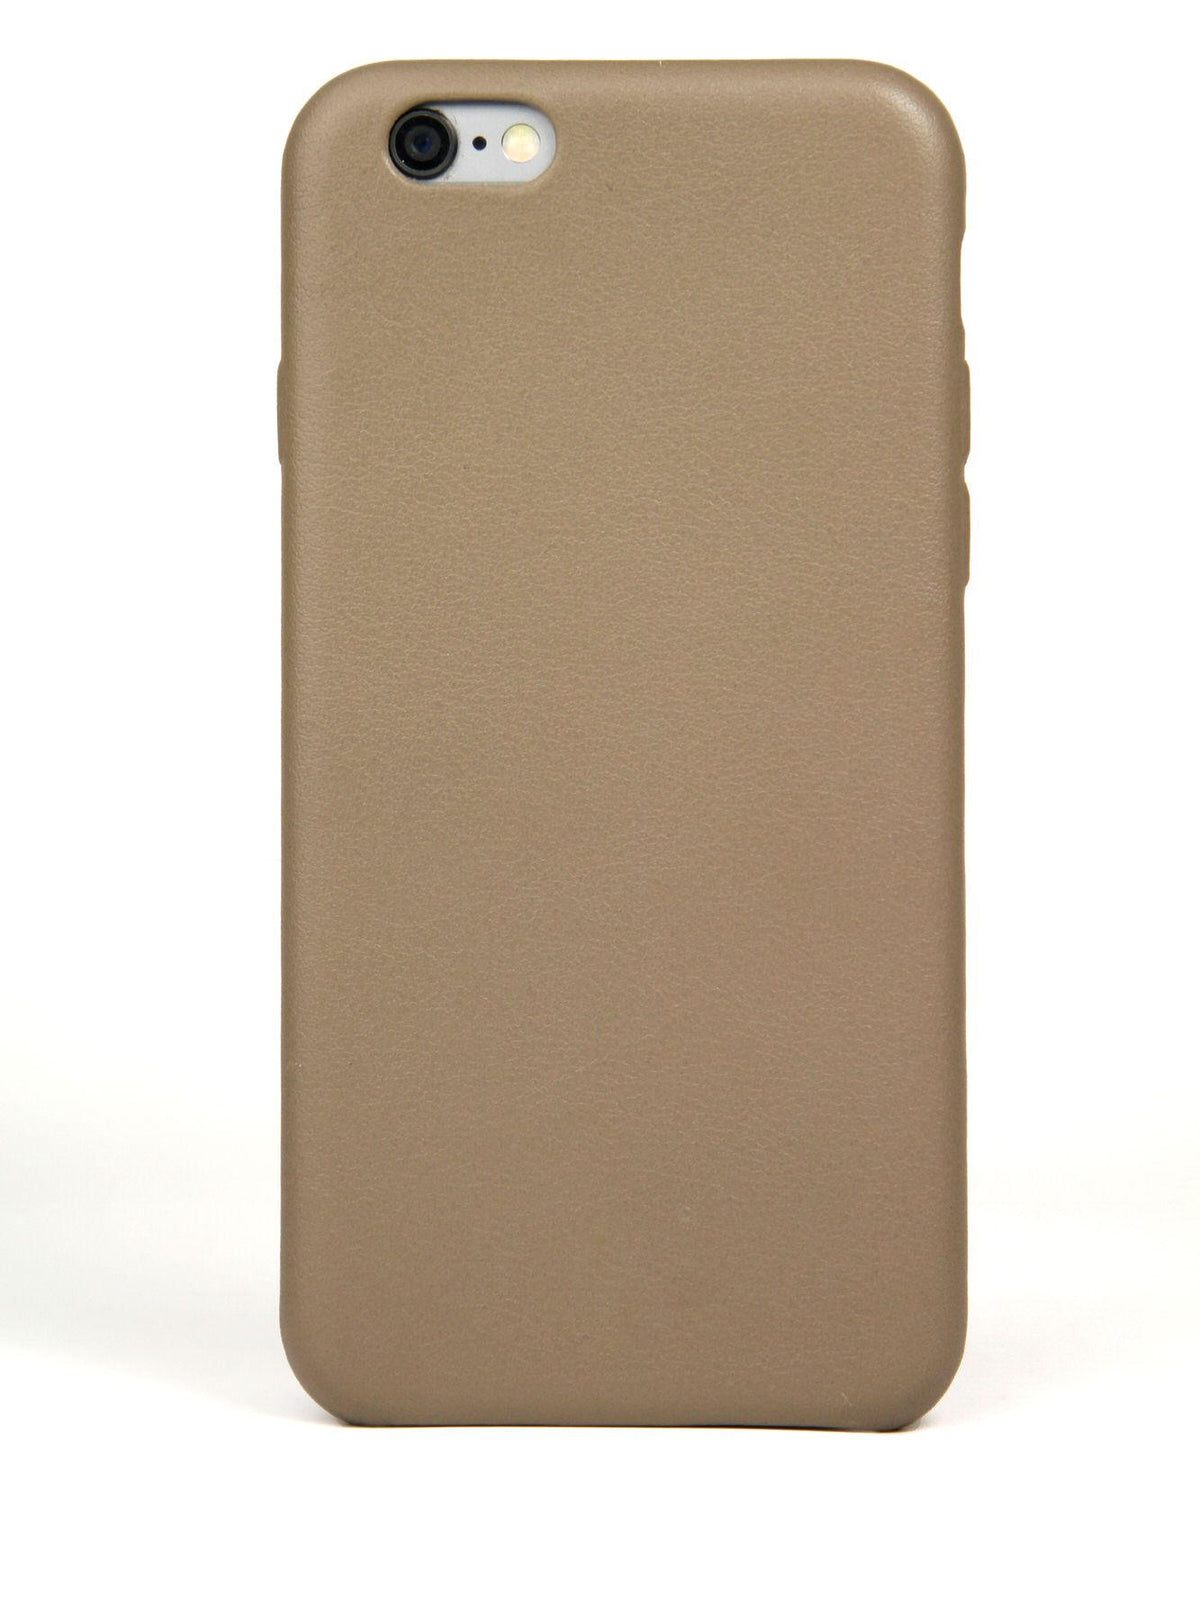 iPhone 6 Case, Taupe Leather